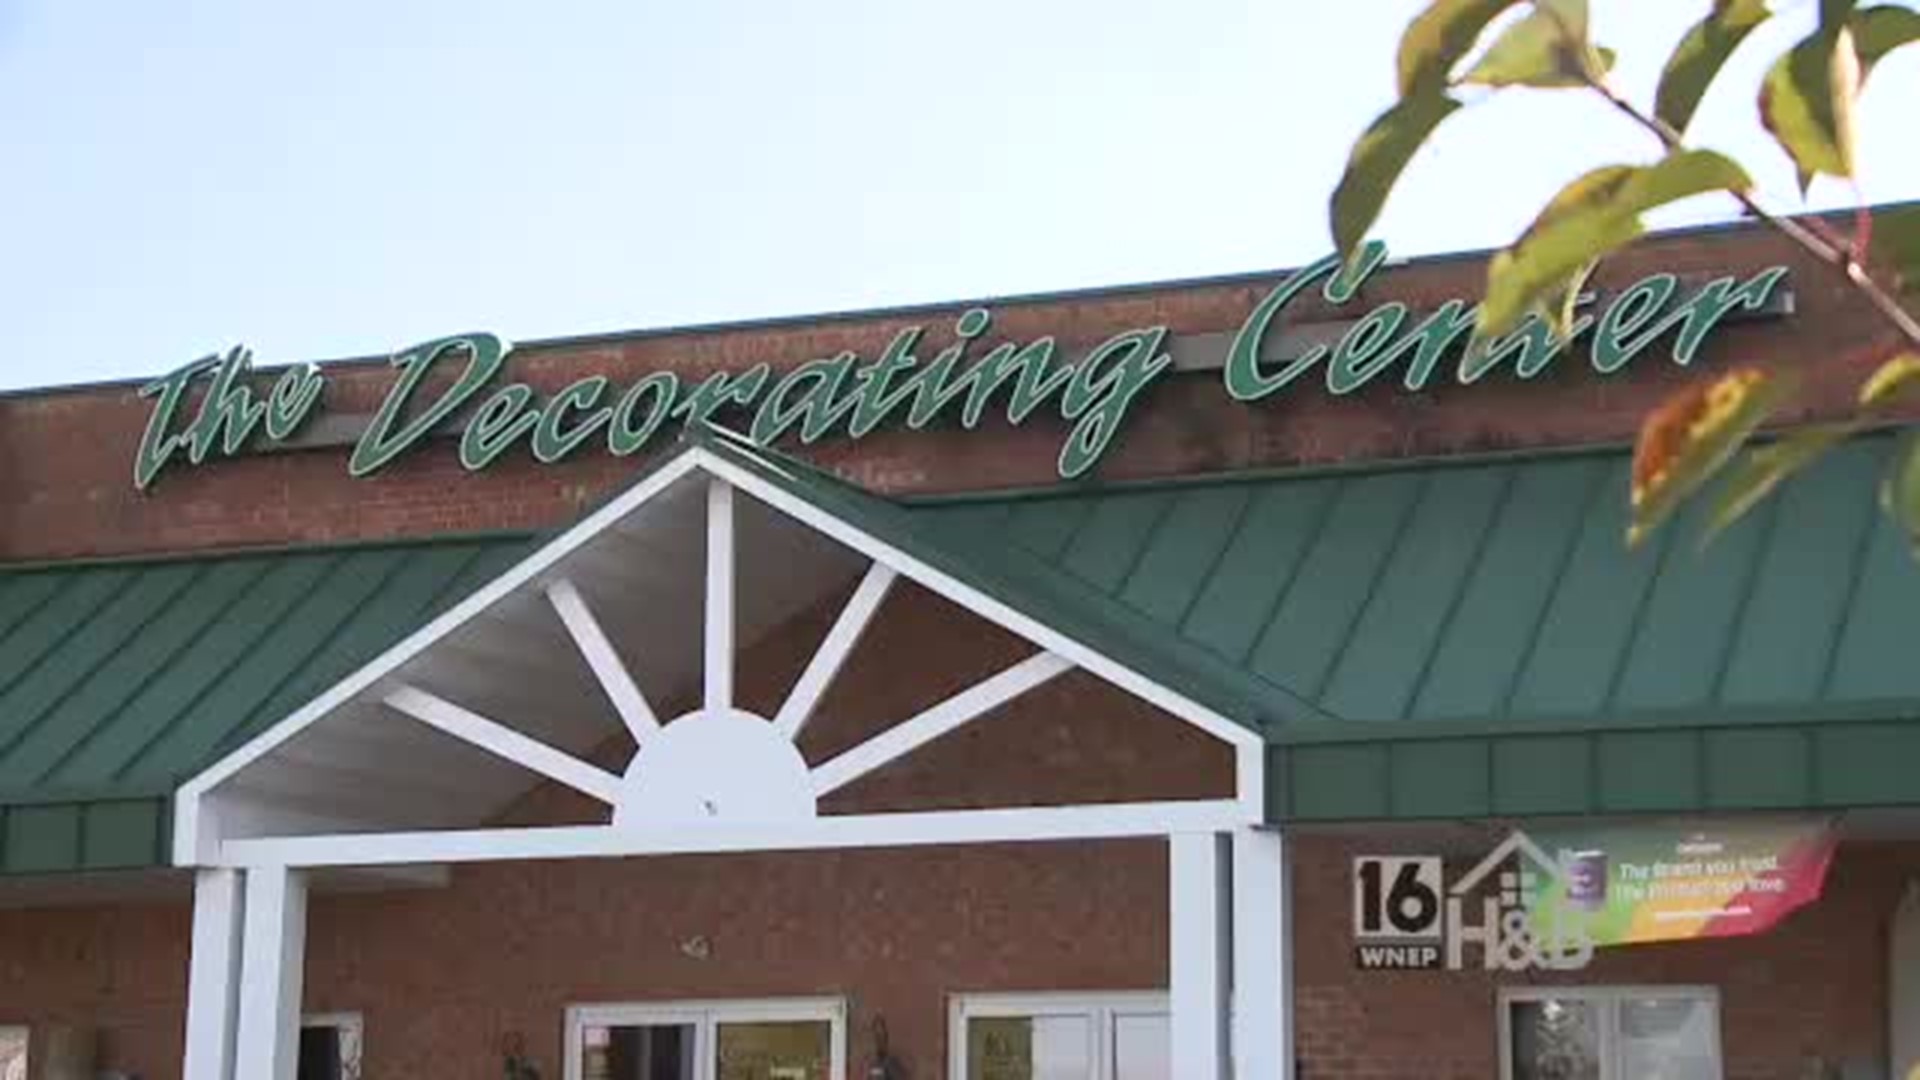 The Decorating Center